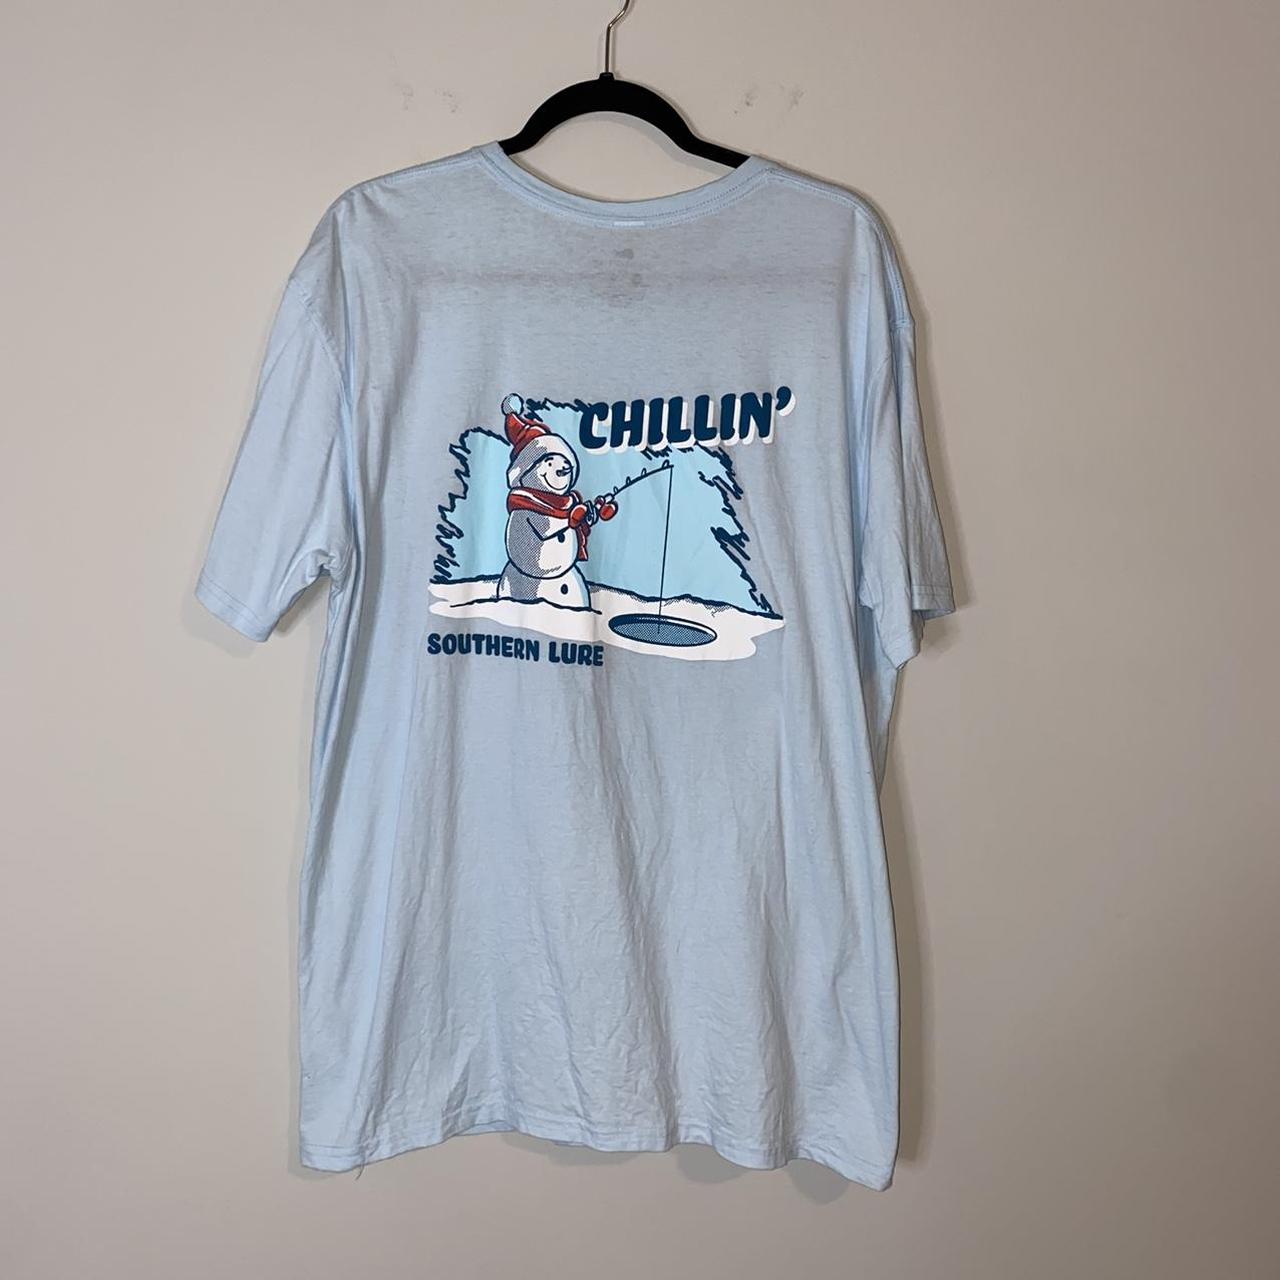 Southern Lure Sky Blue Chillin' Graphic Short Sleeve - Depop